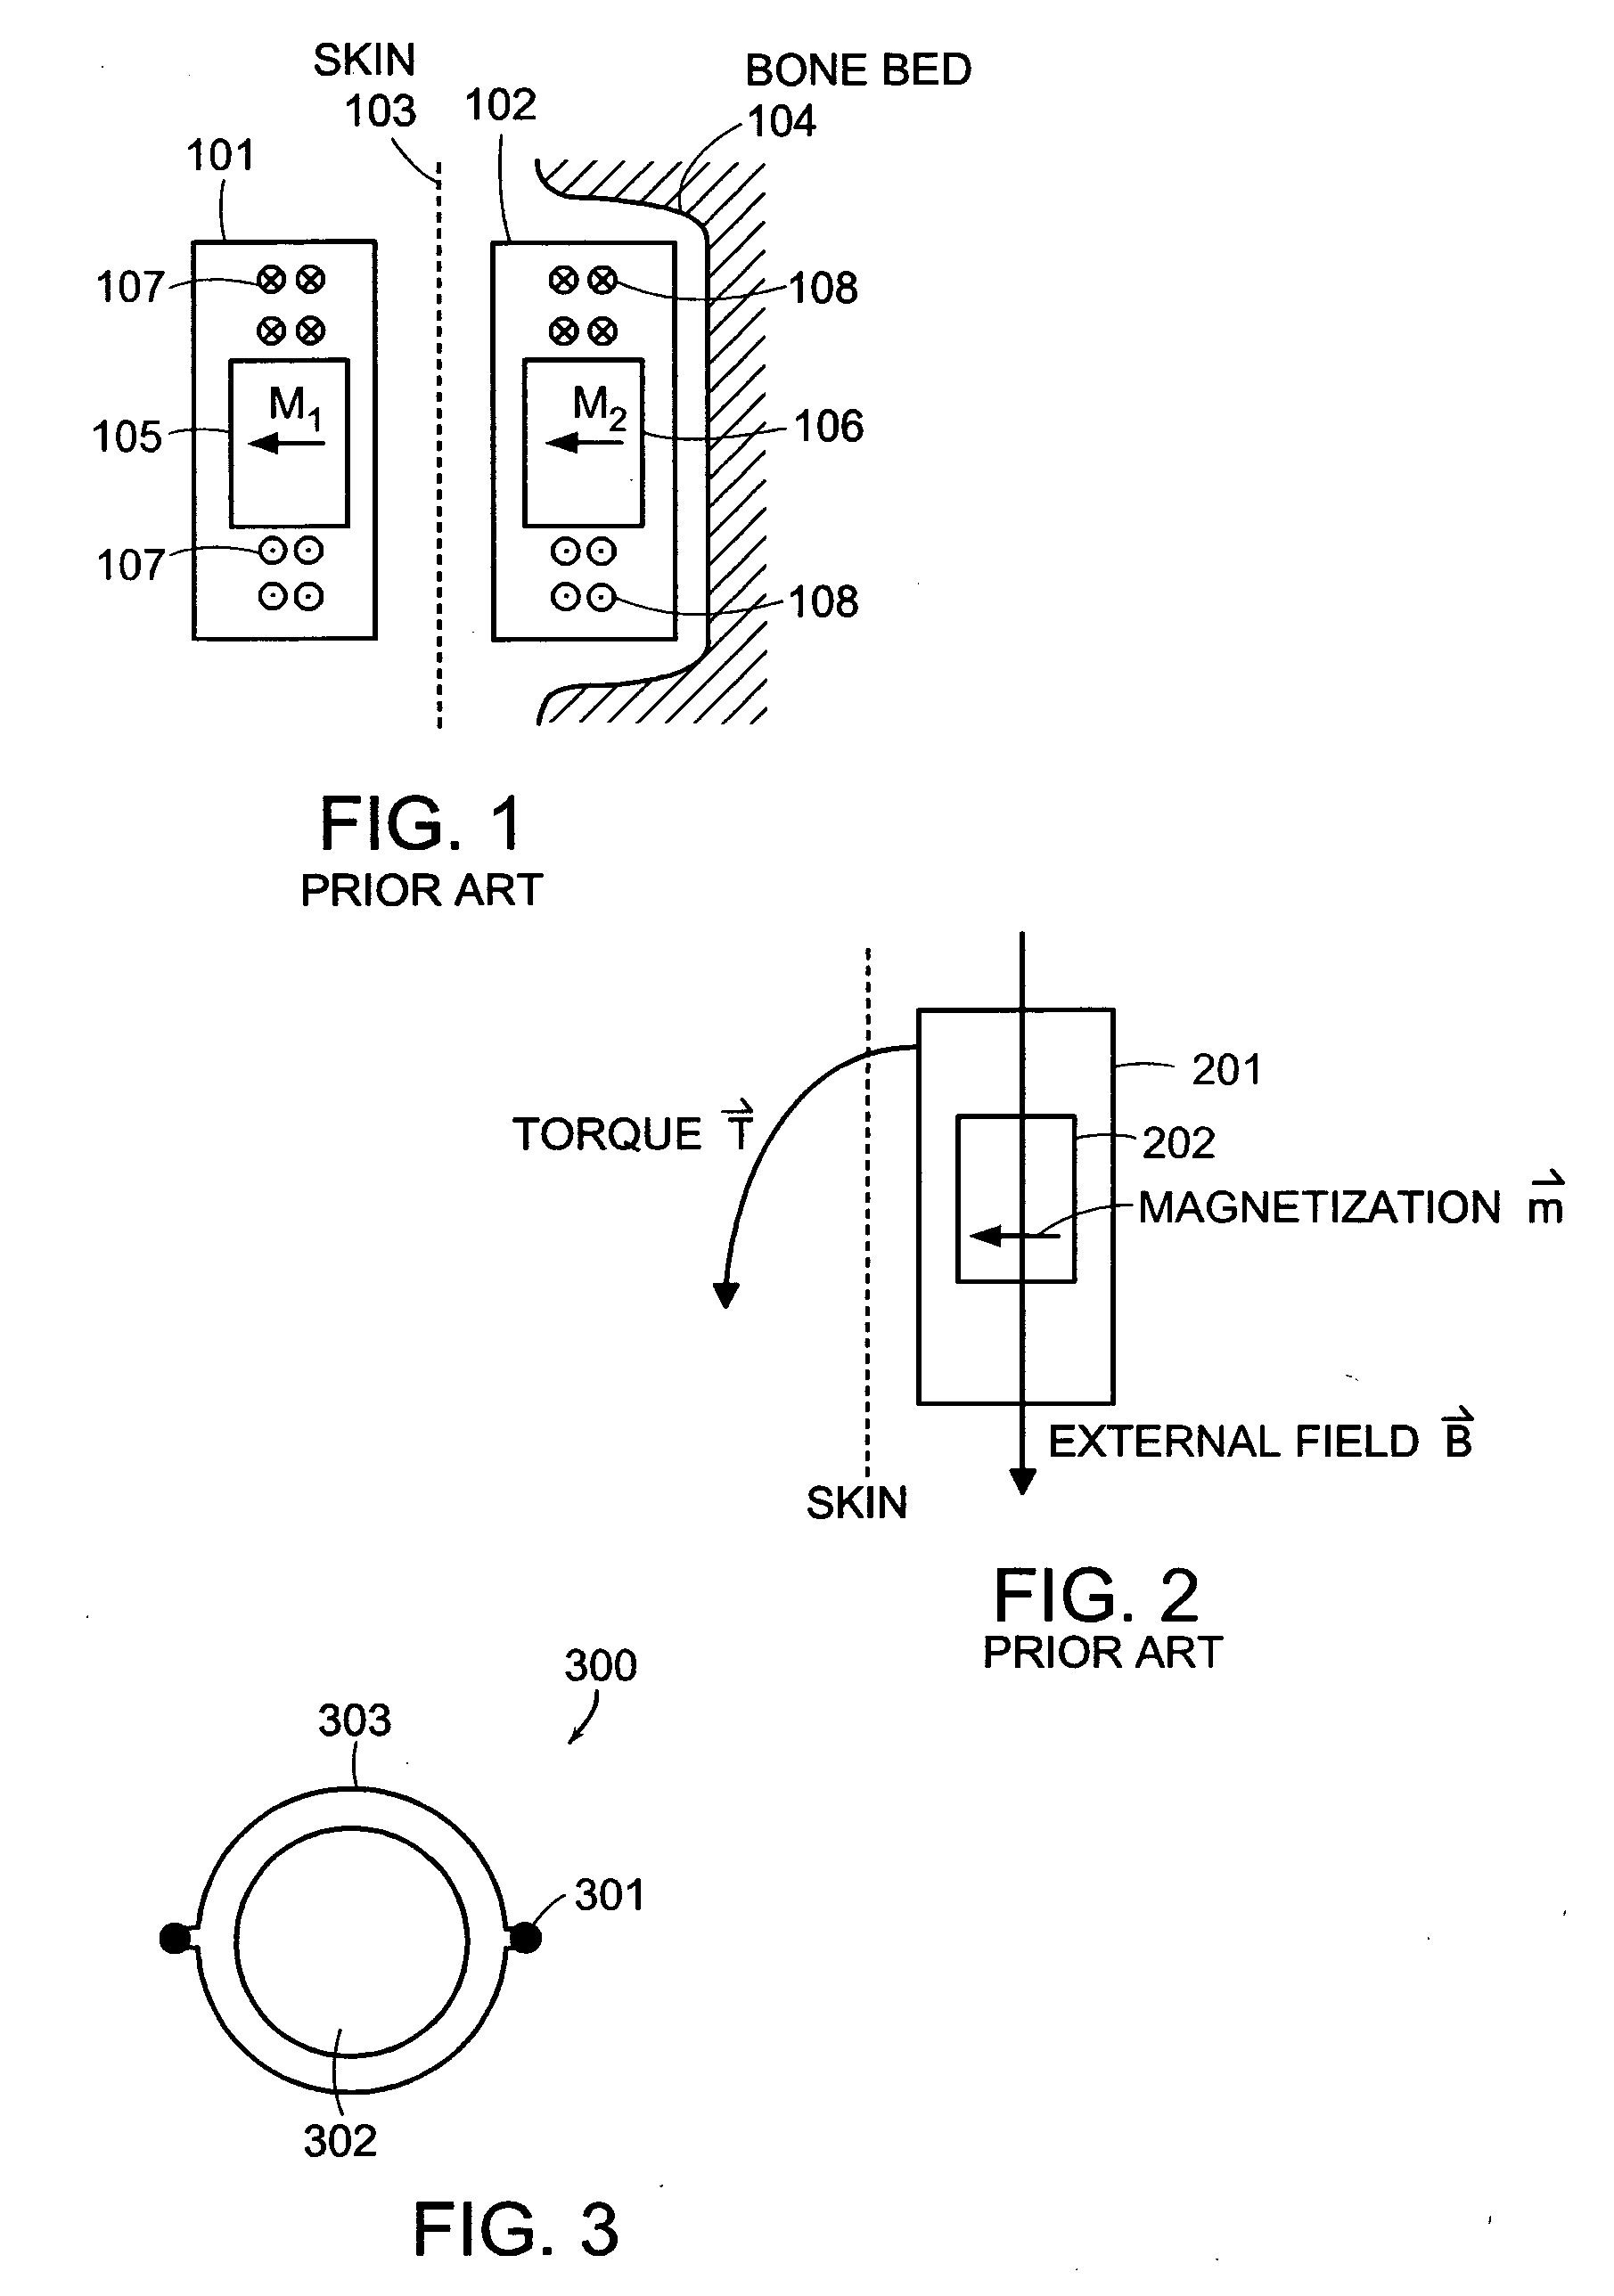 Reducing effect of magnetic and electromagnetic fields on an implant's magnet and/or electronics